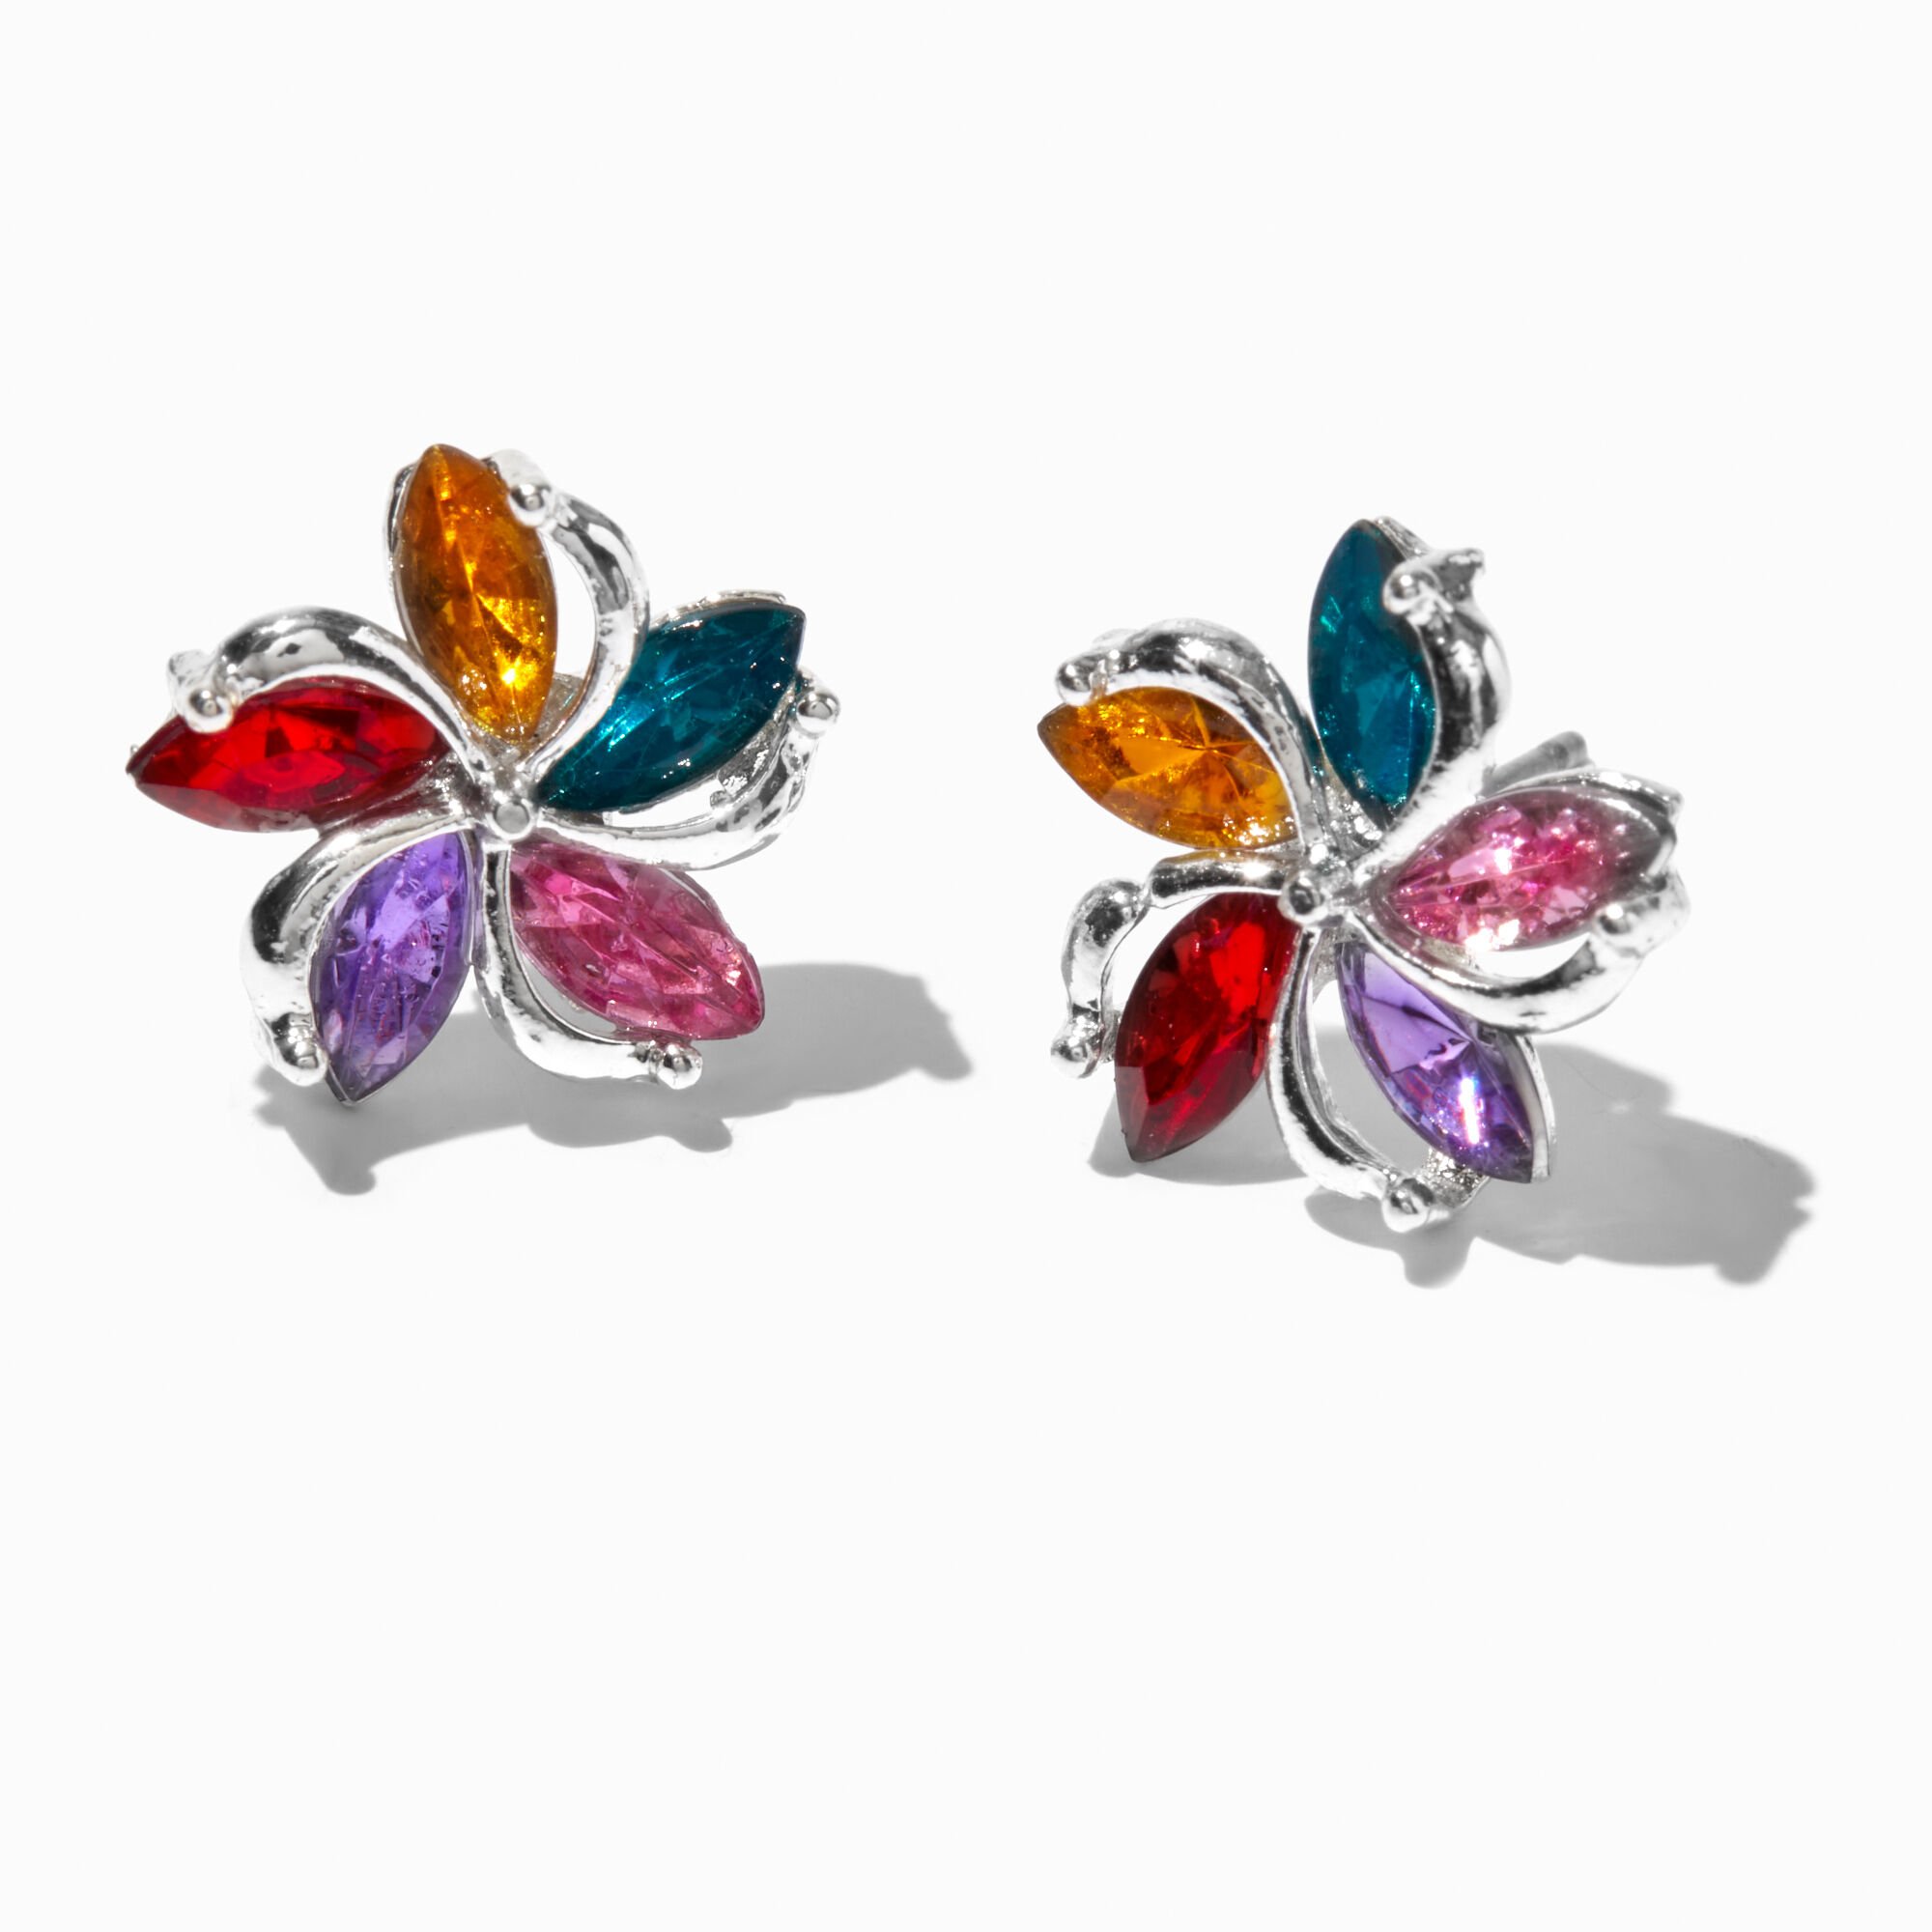 View Claires Rainbow Crystal Flower Swirl Tone Stud Earrings Silver information